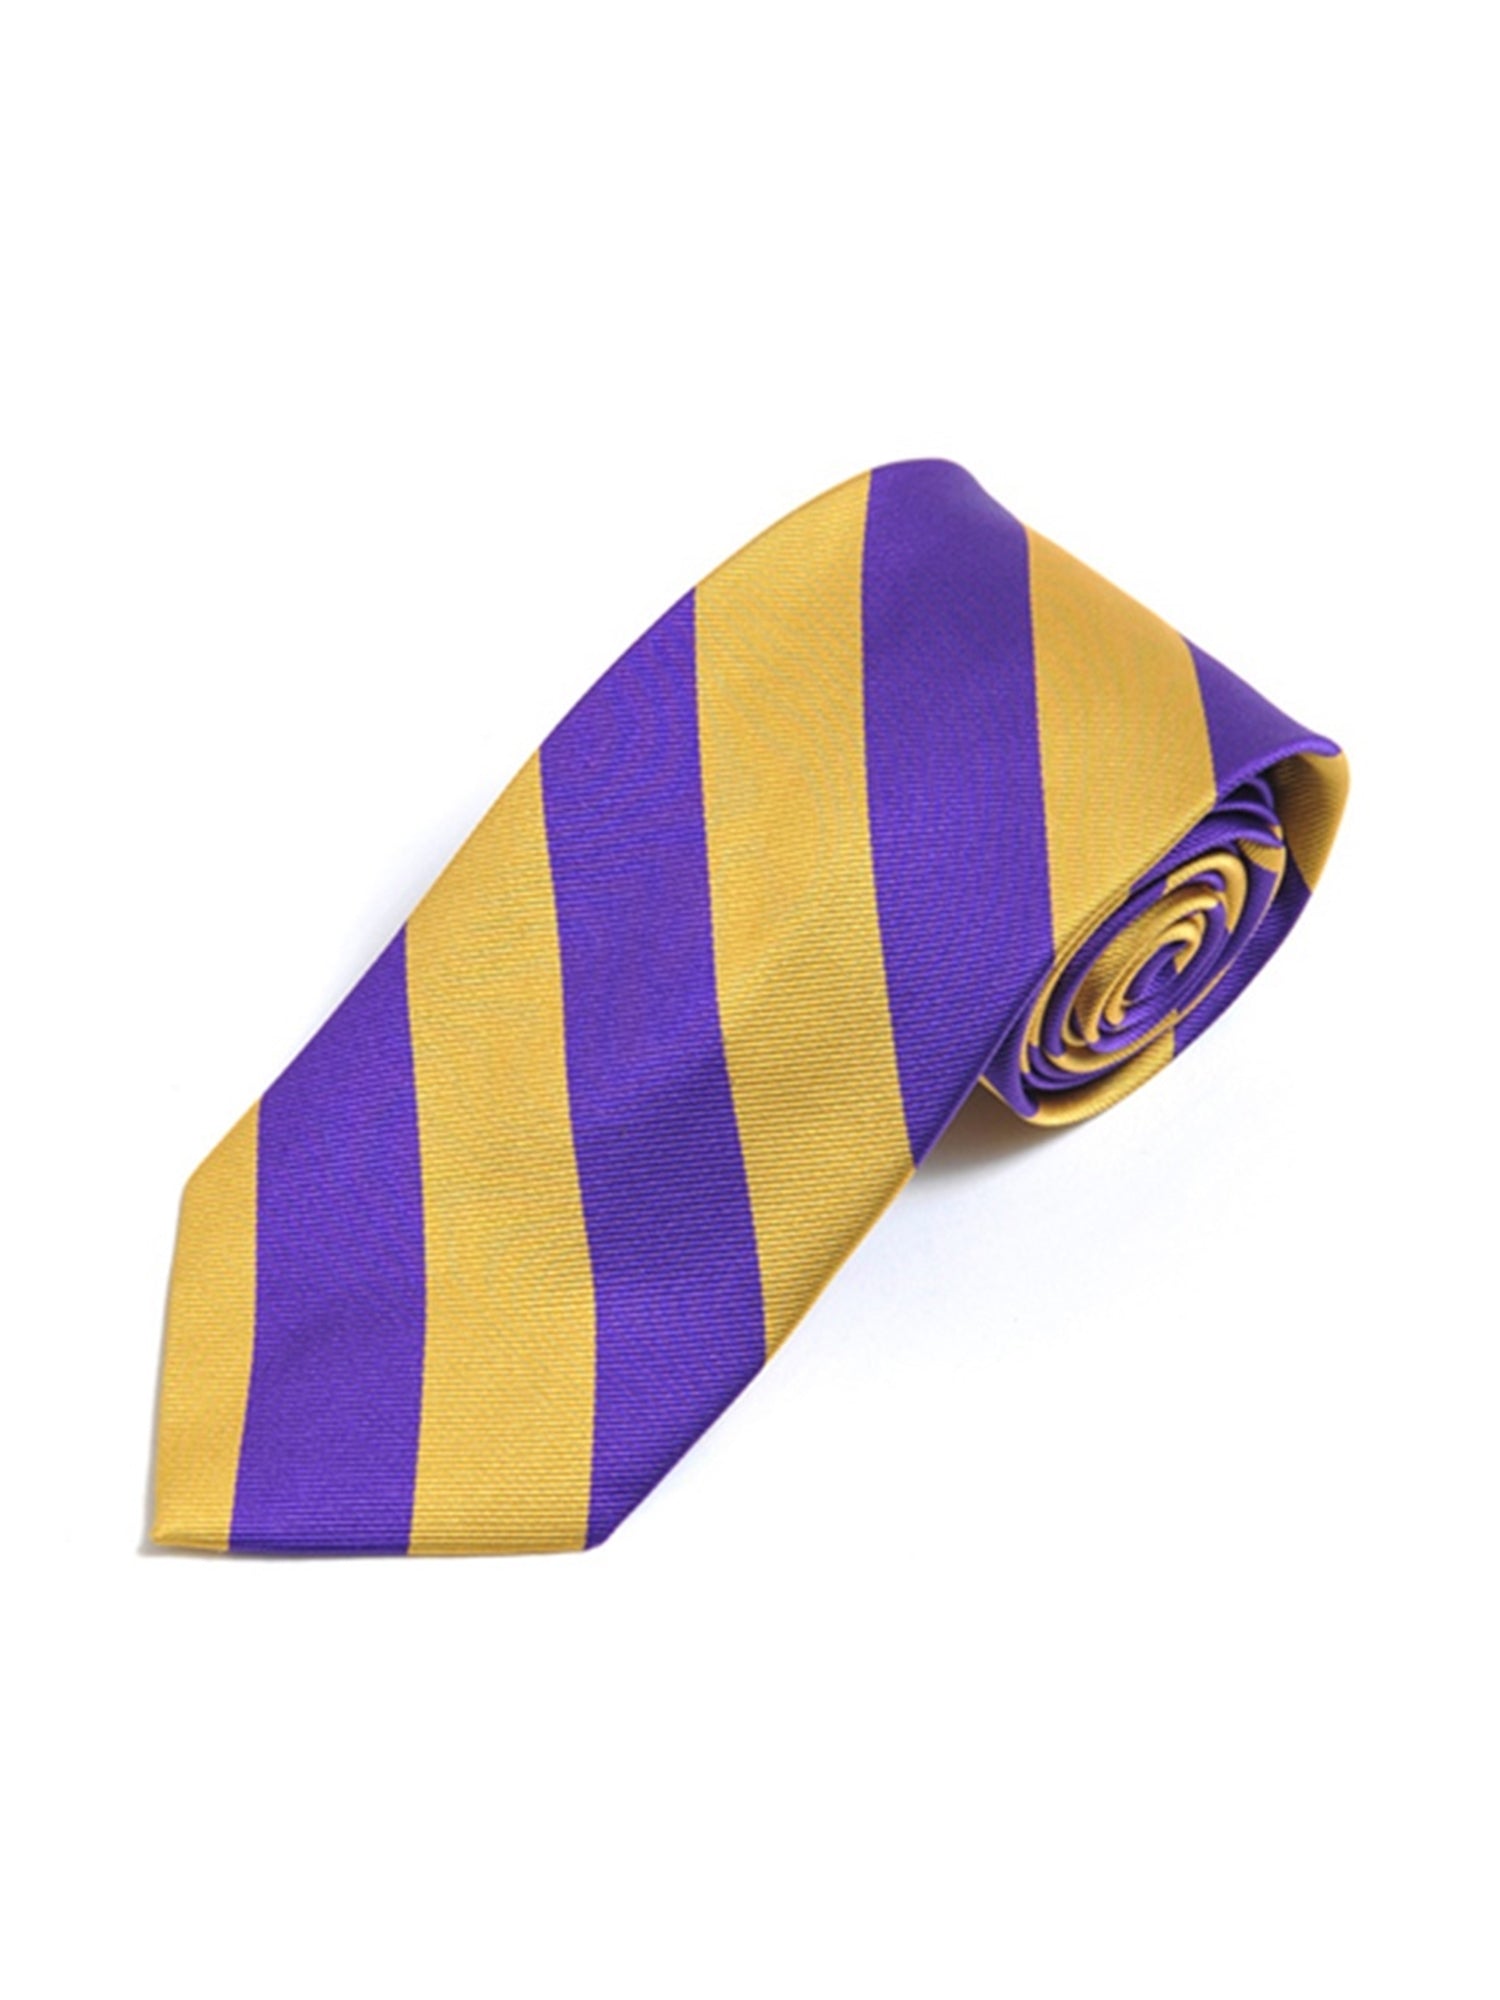 Men's College Striped Colored Silk Long Or X-Long Neck Tie Neck Tie TheDapperTie Purple & Gold 57" long & 3.25" wide 